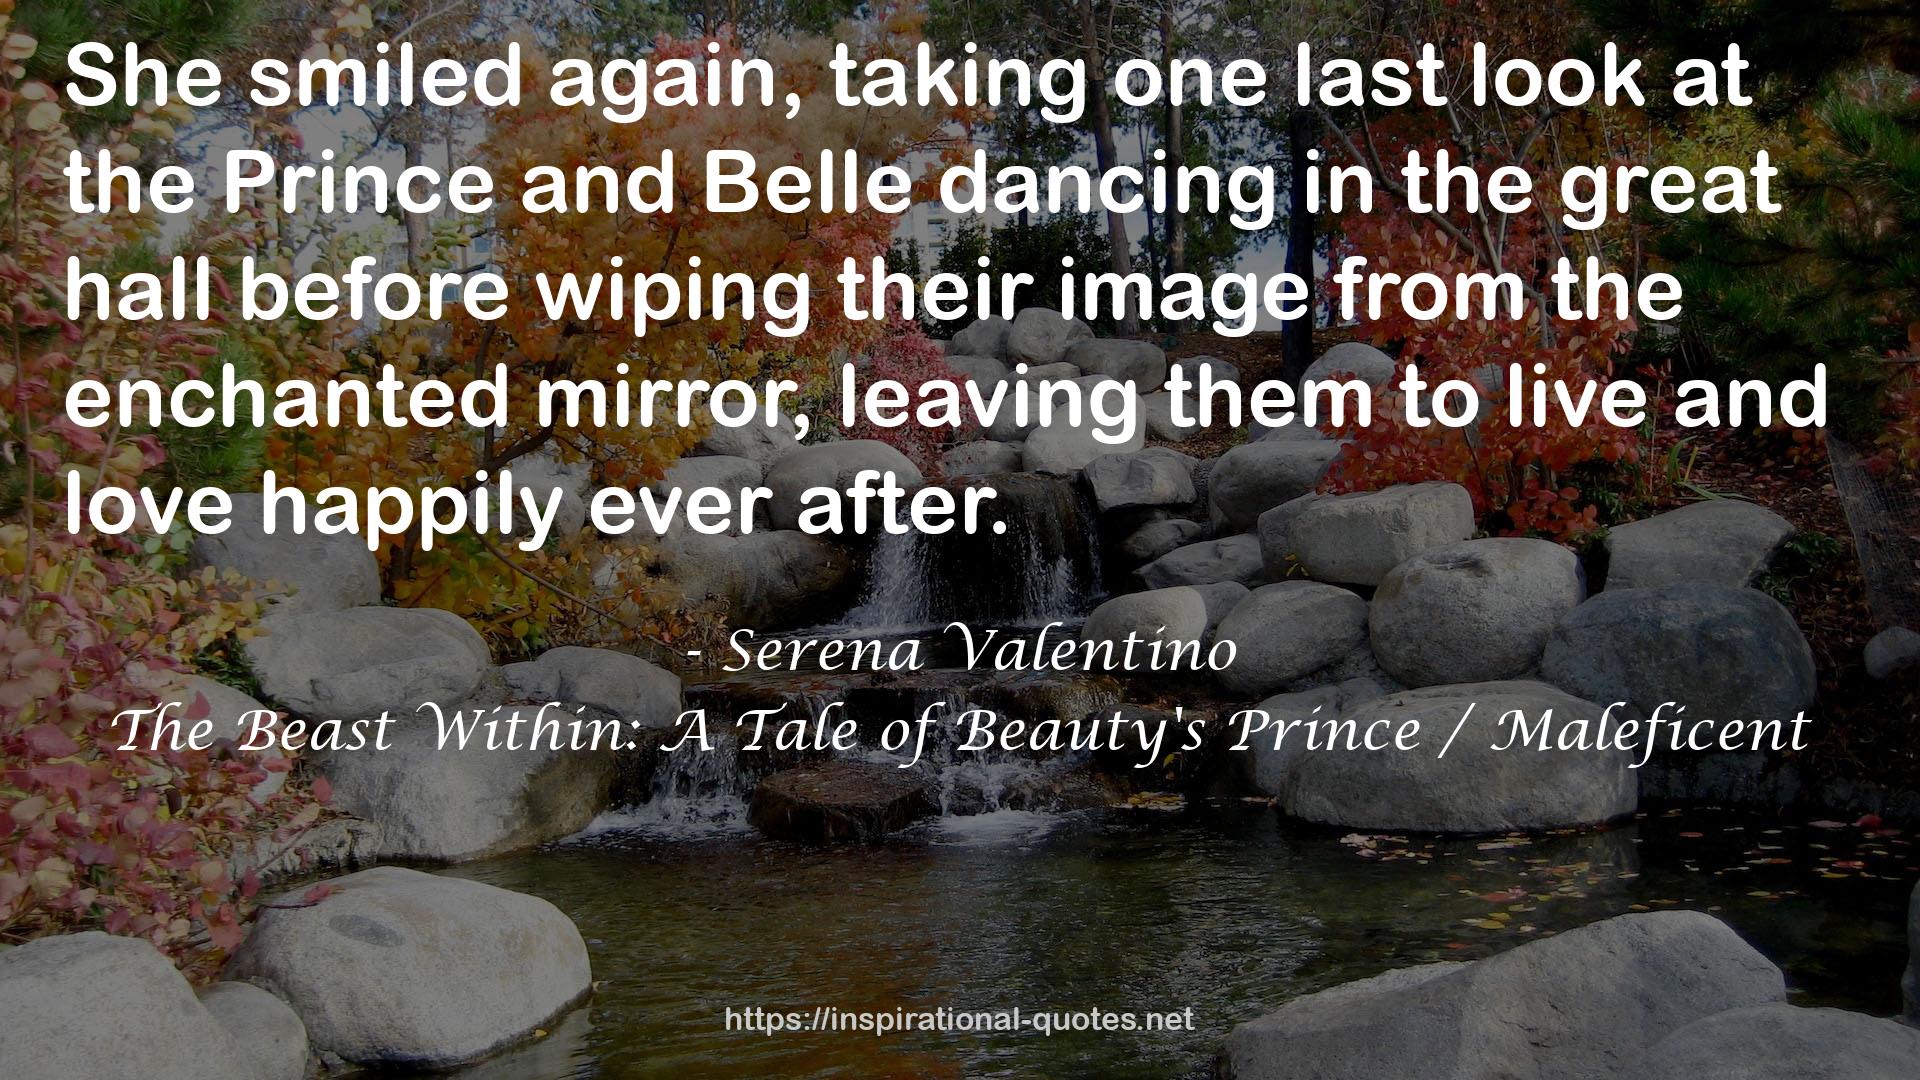 The Beast Within: A Tale of Beauty's Prince / Maleficent QUOTES